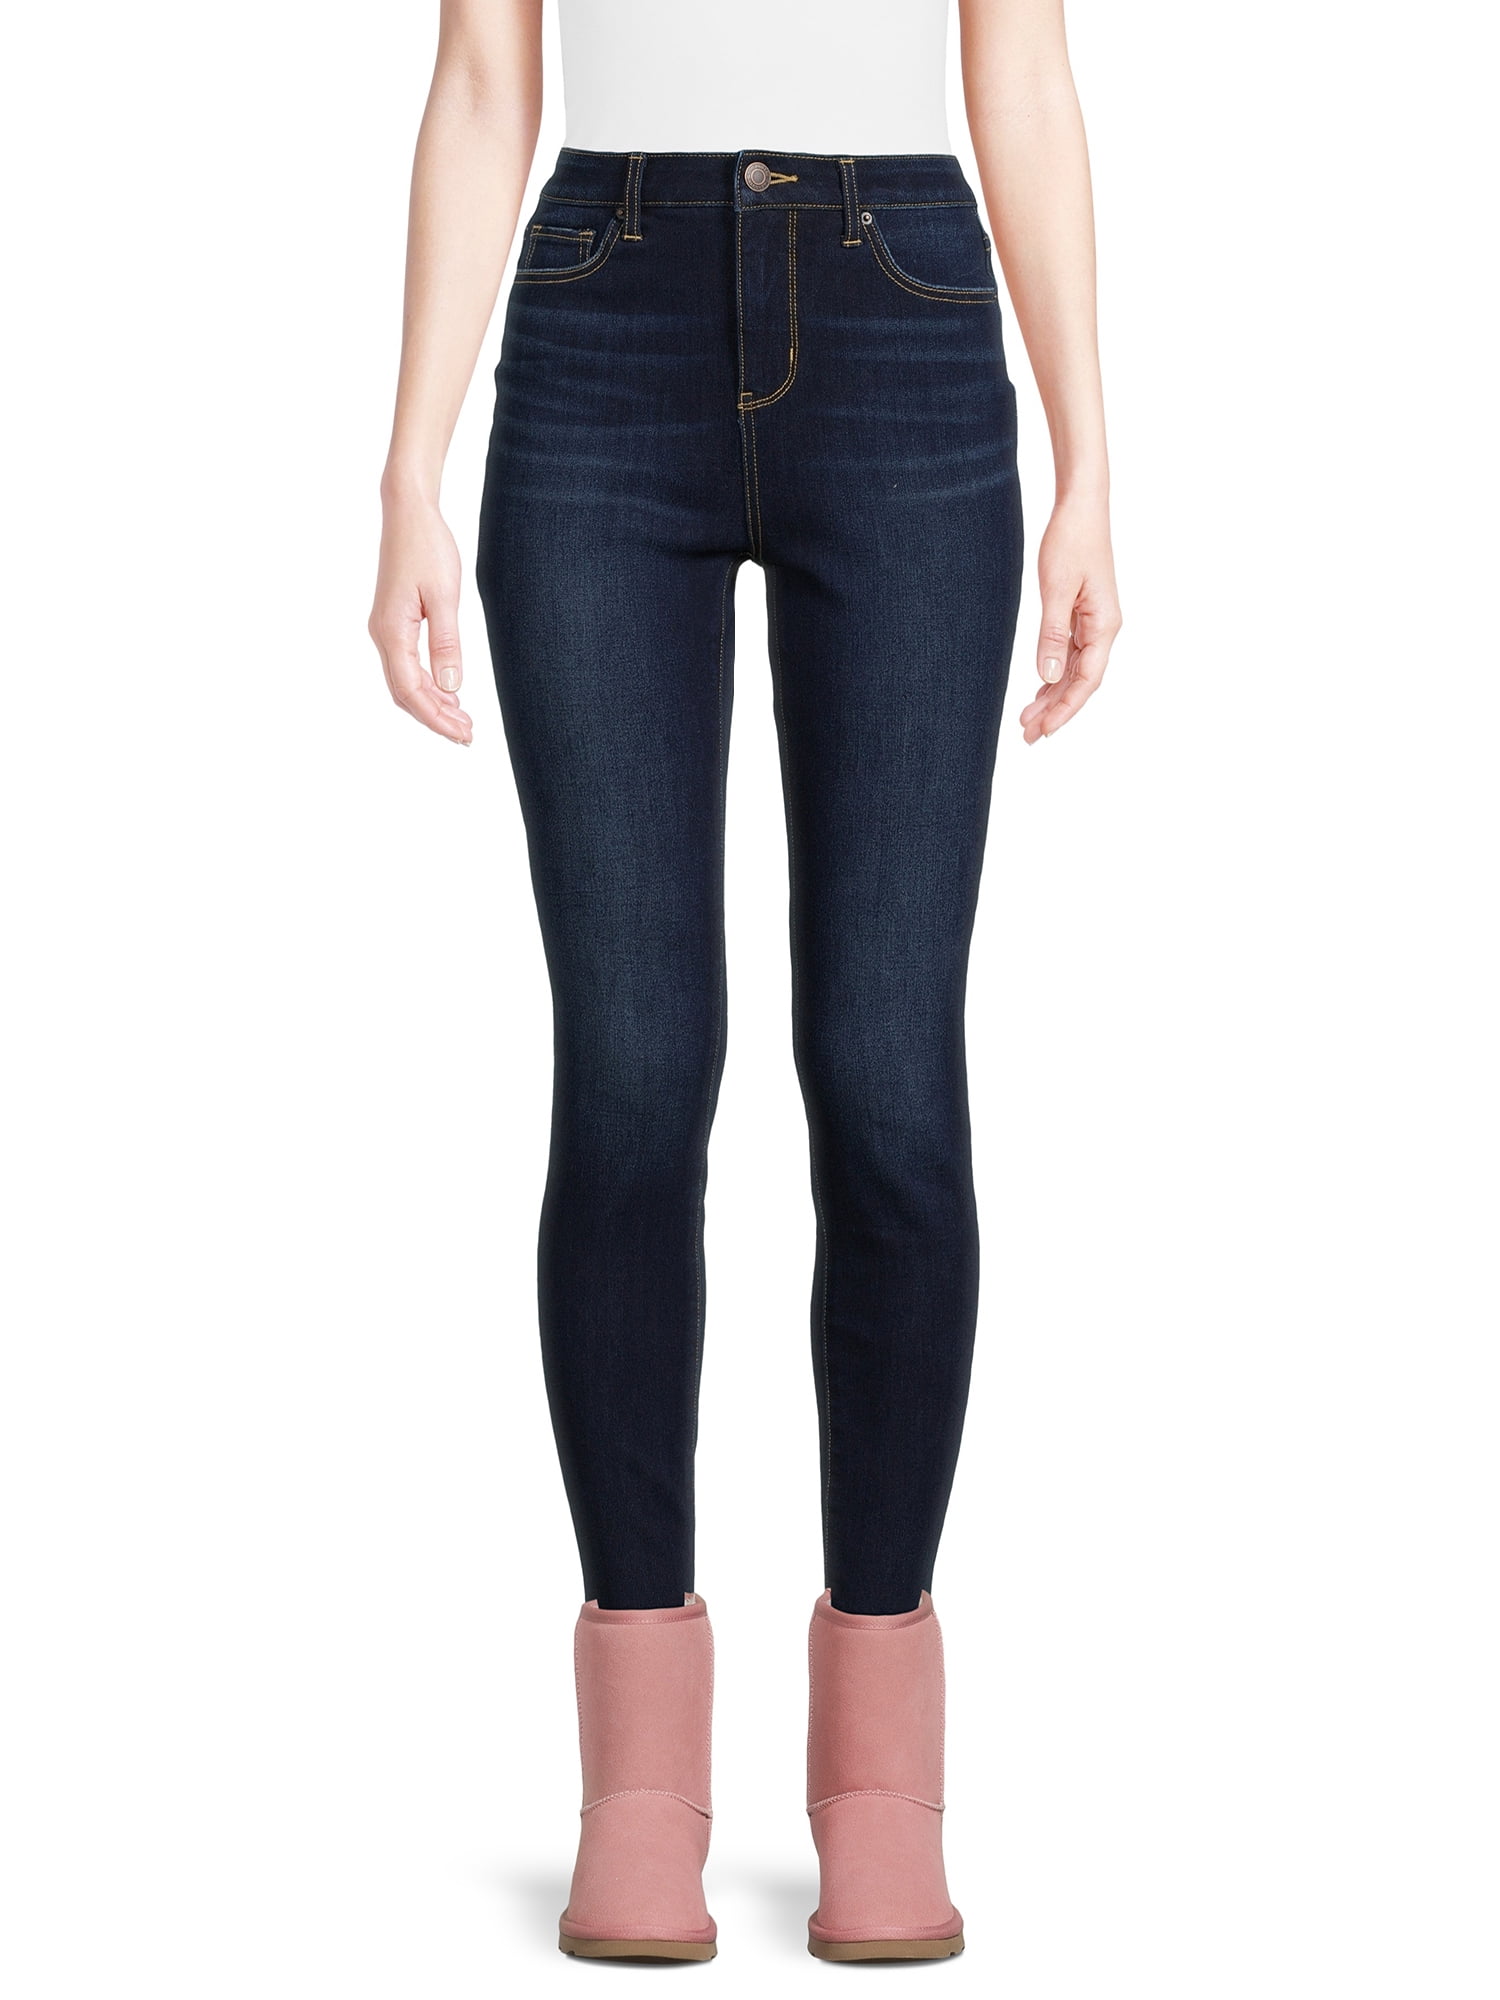 Time and Tru Women's High Rise Skinny Jeans, 29 Inseam for